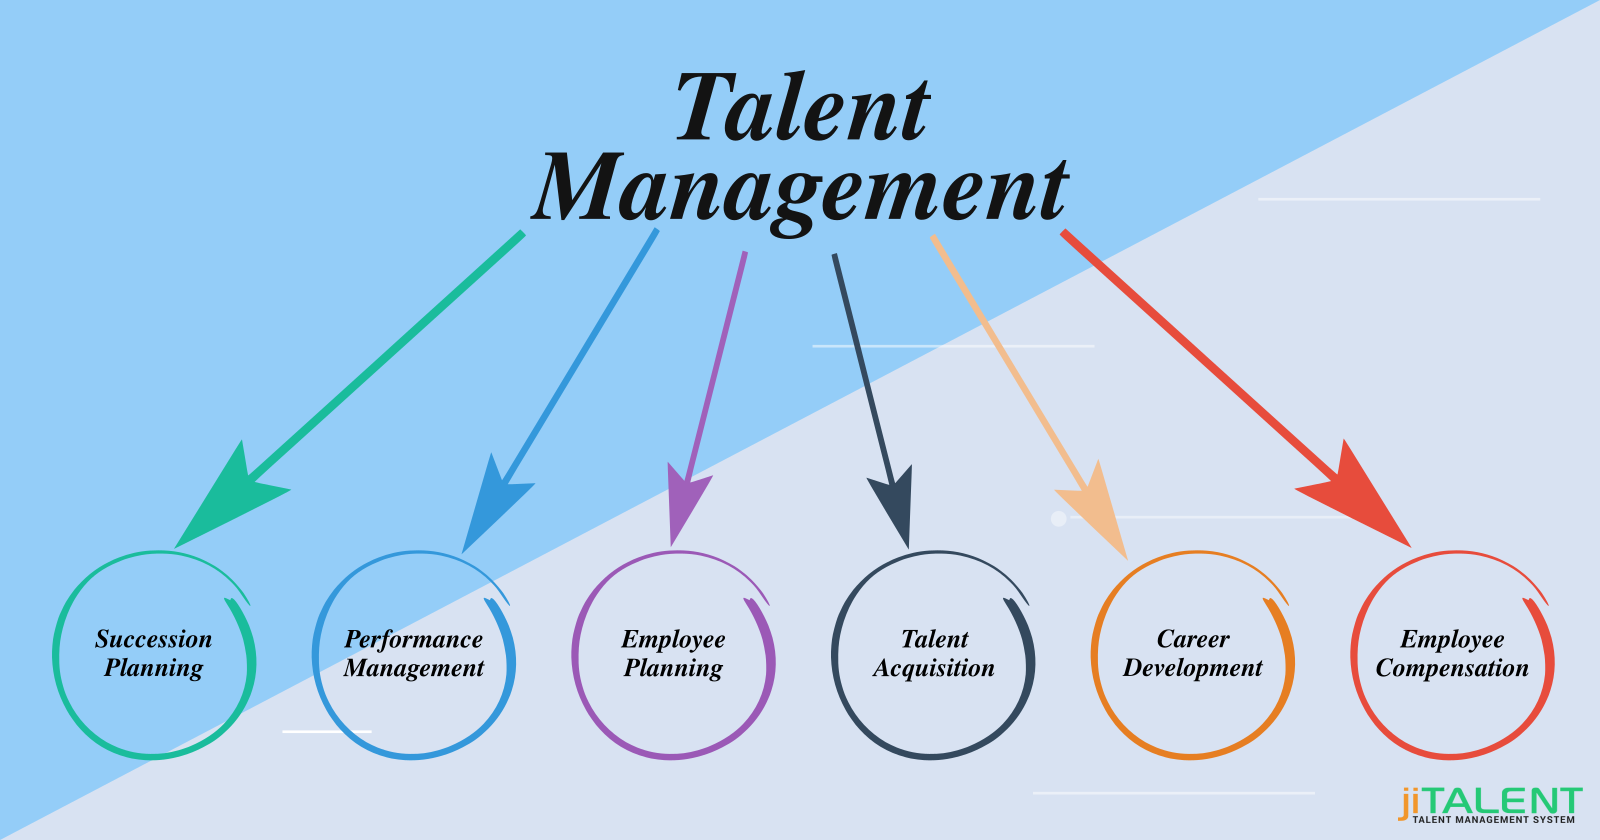 Components to Look For in a Talent Management System